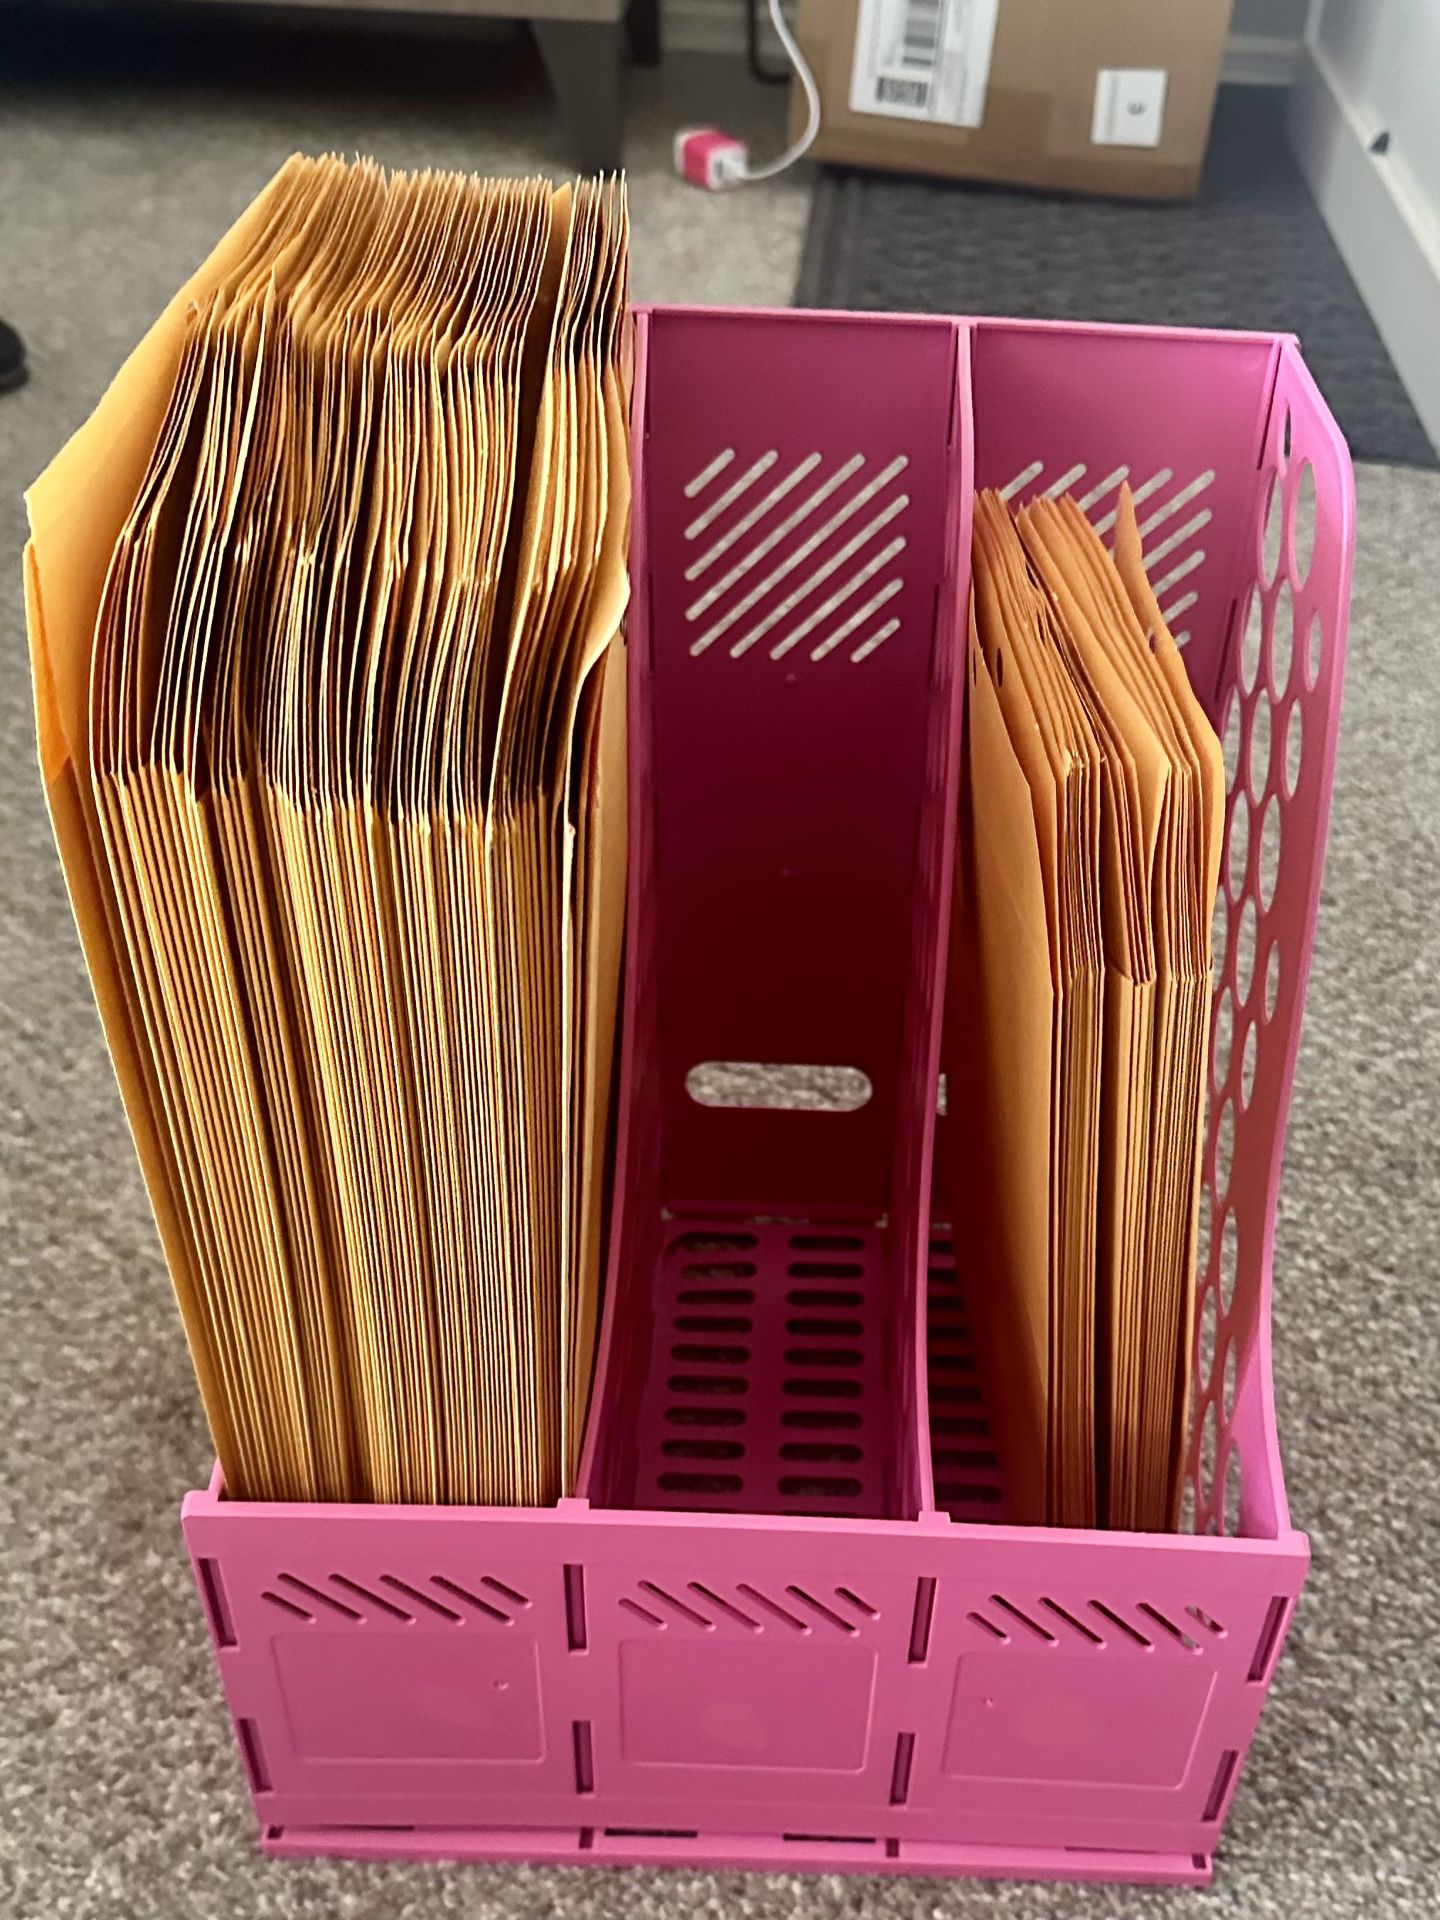 64 TOTAL Manila Clasp envelopes 37 are 9x12 and 27 are 6 1/2 x 9 1/2 with pink storage desktop organizer 